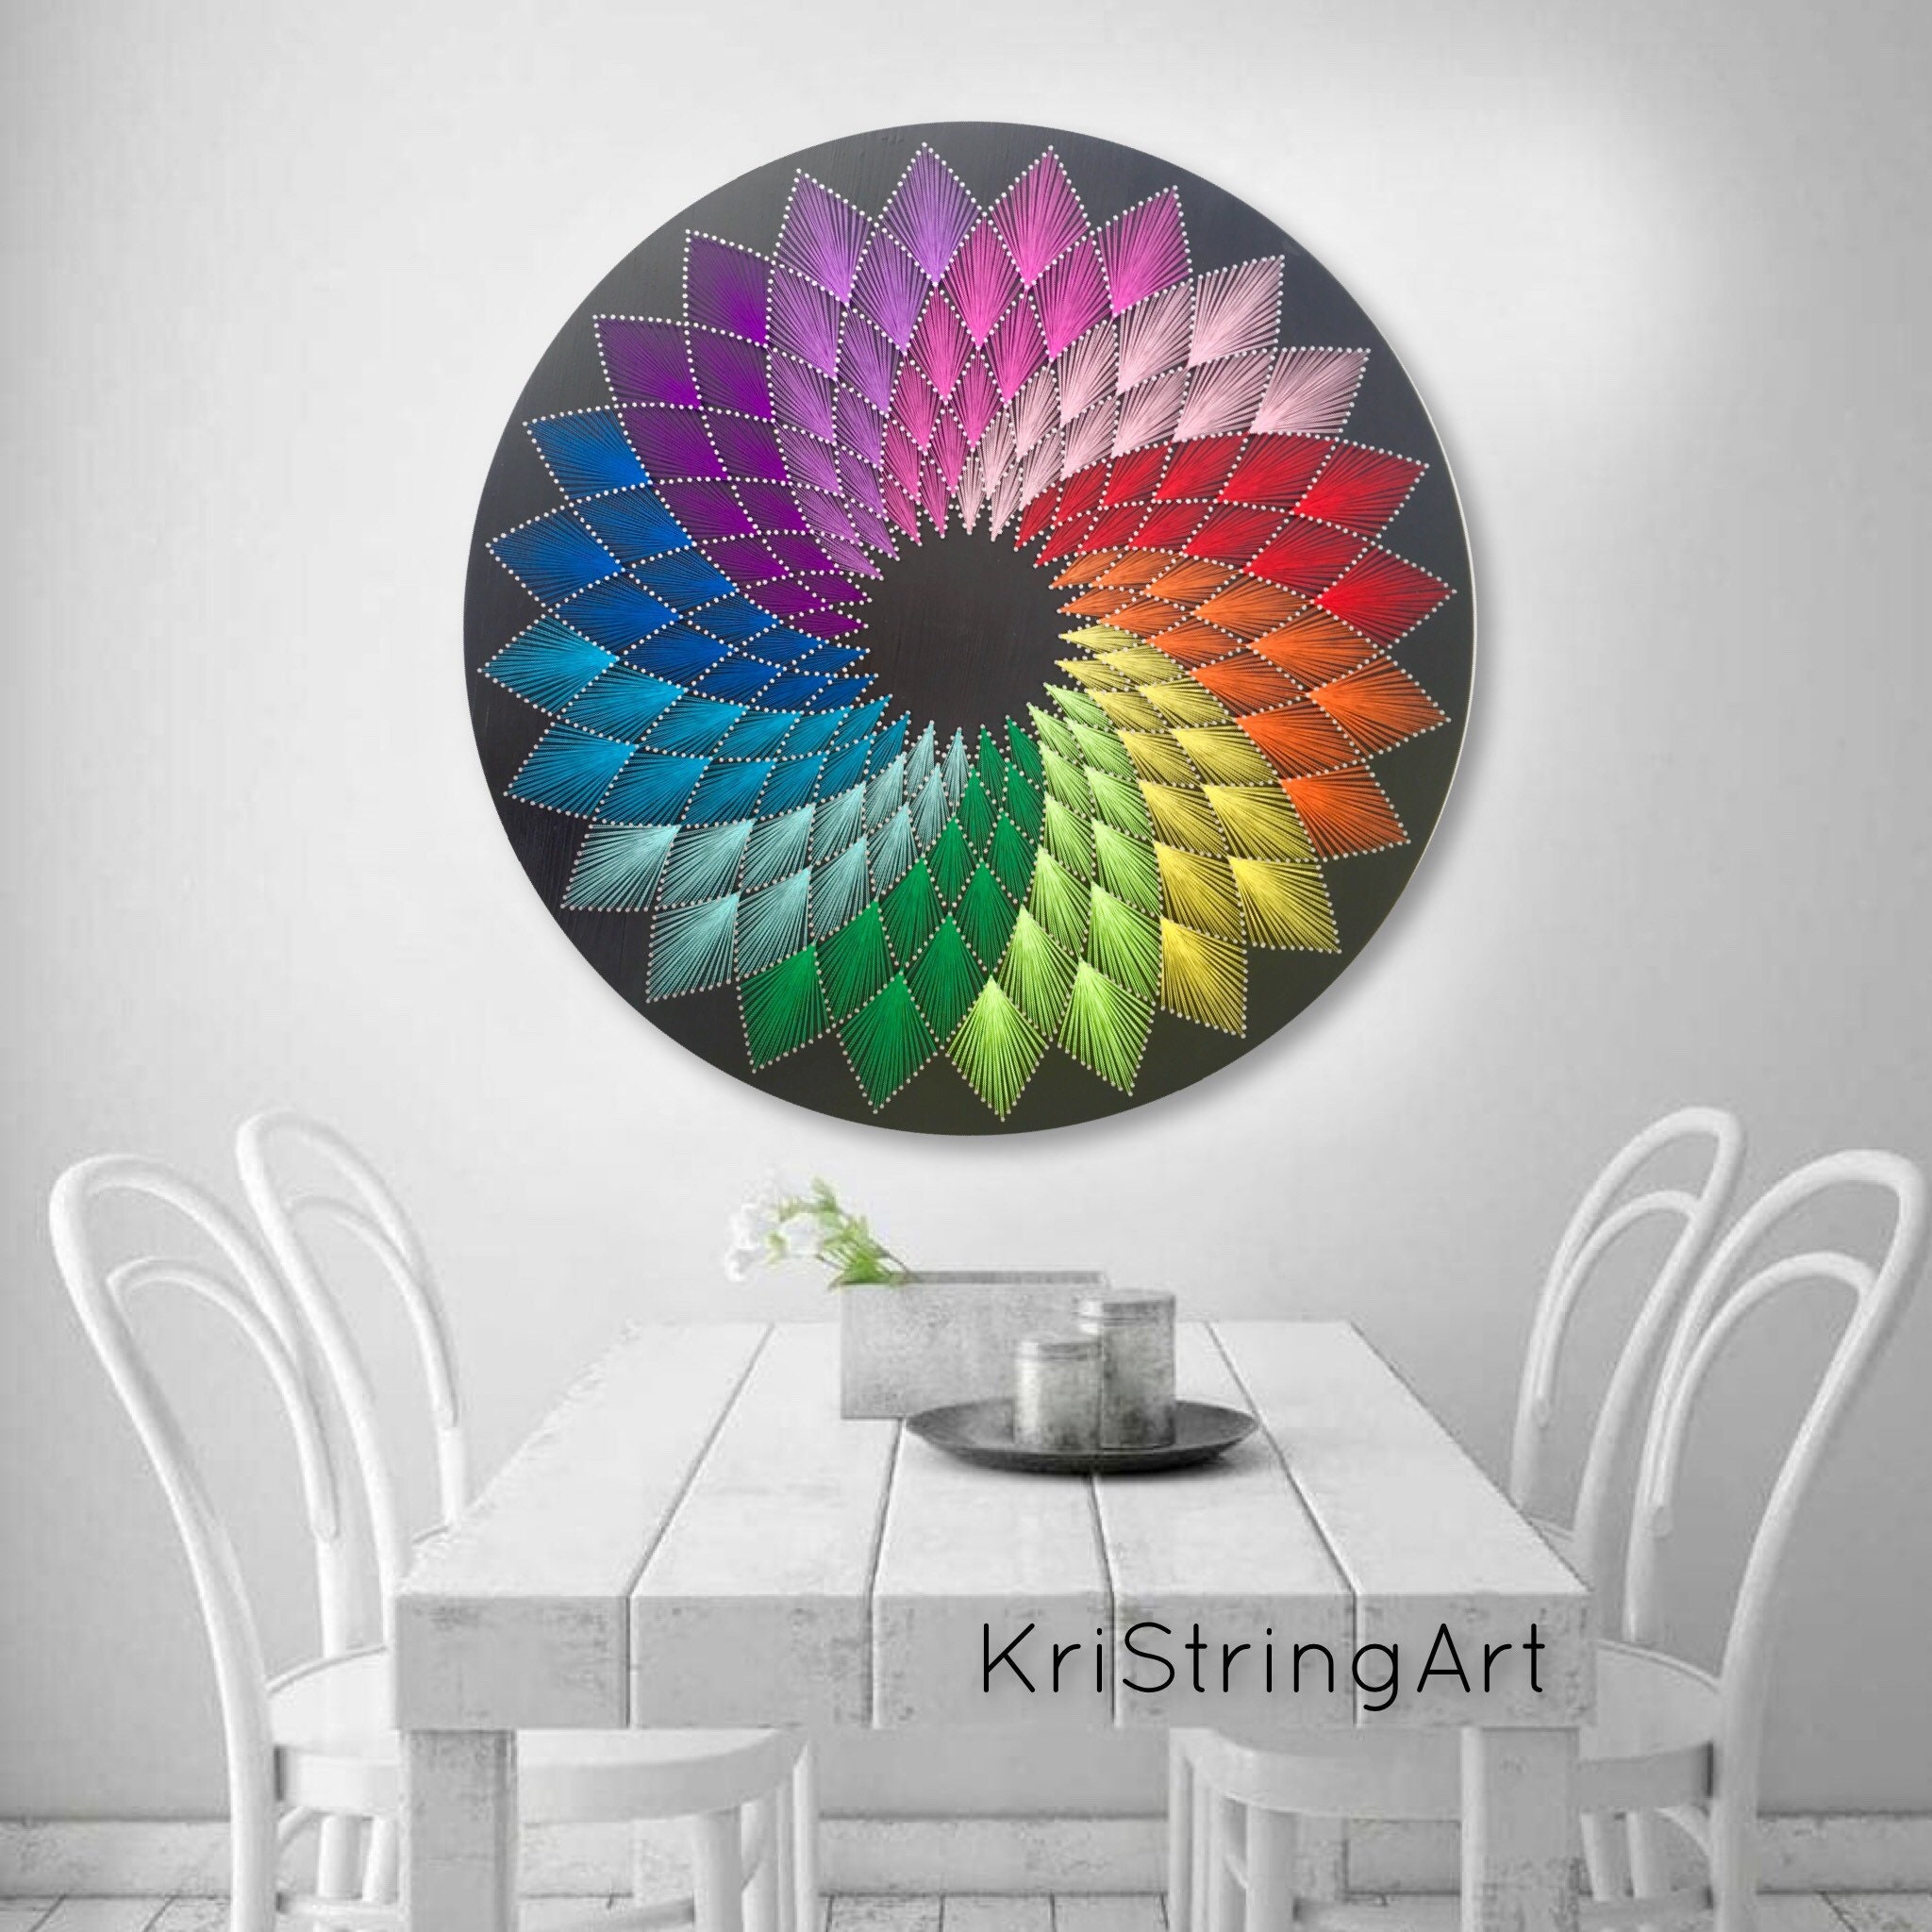 String Art Kit for Adults and Kids, DIY String Art Mandala Wall Decor,  Great DIY Gift for Friends and Family, Art Kits for Teens and Adults 